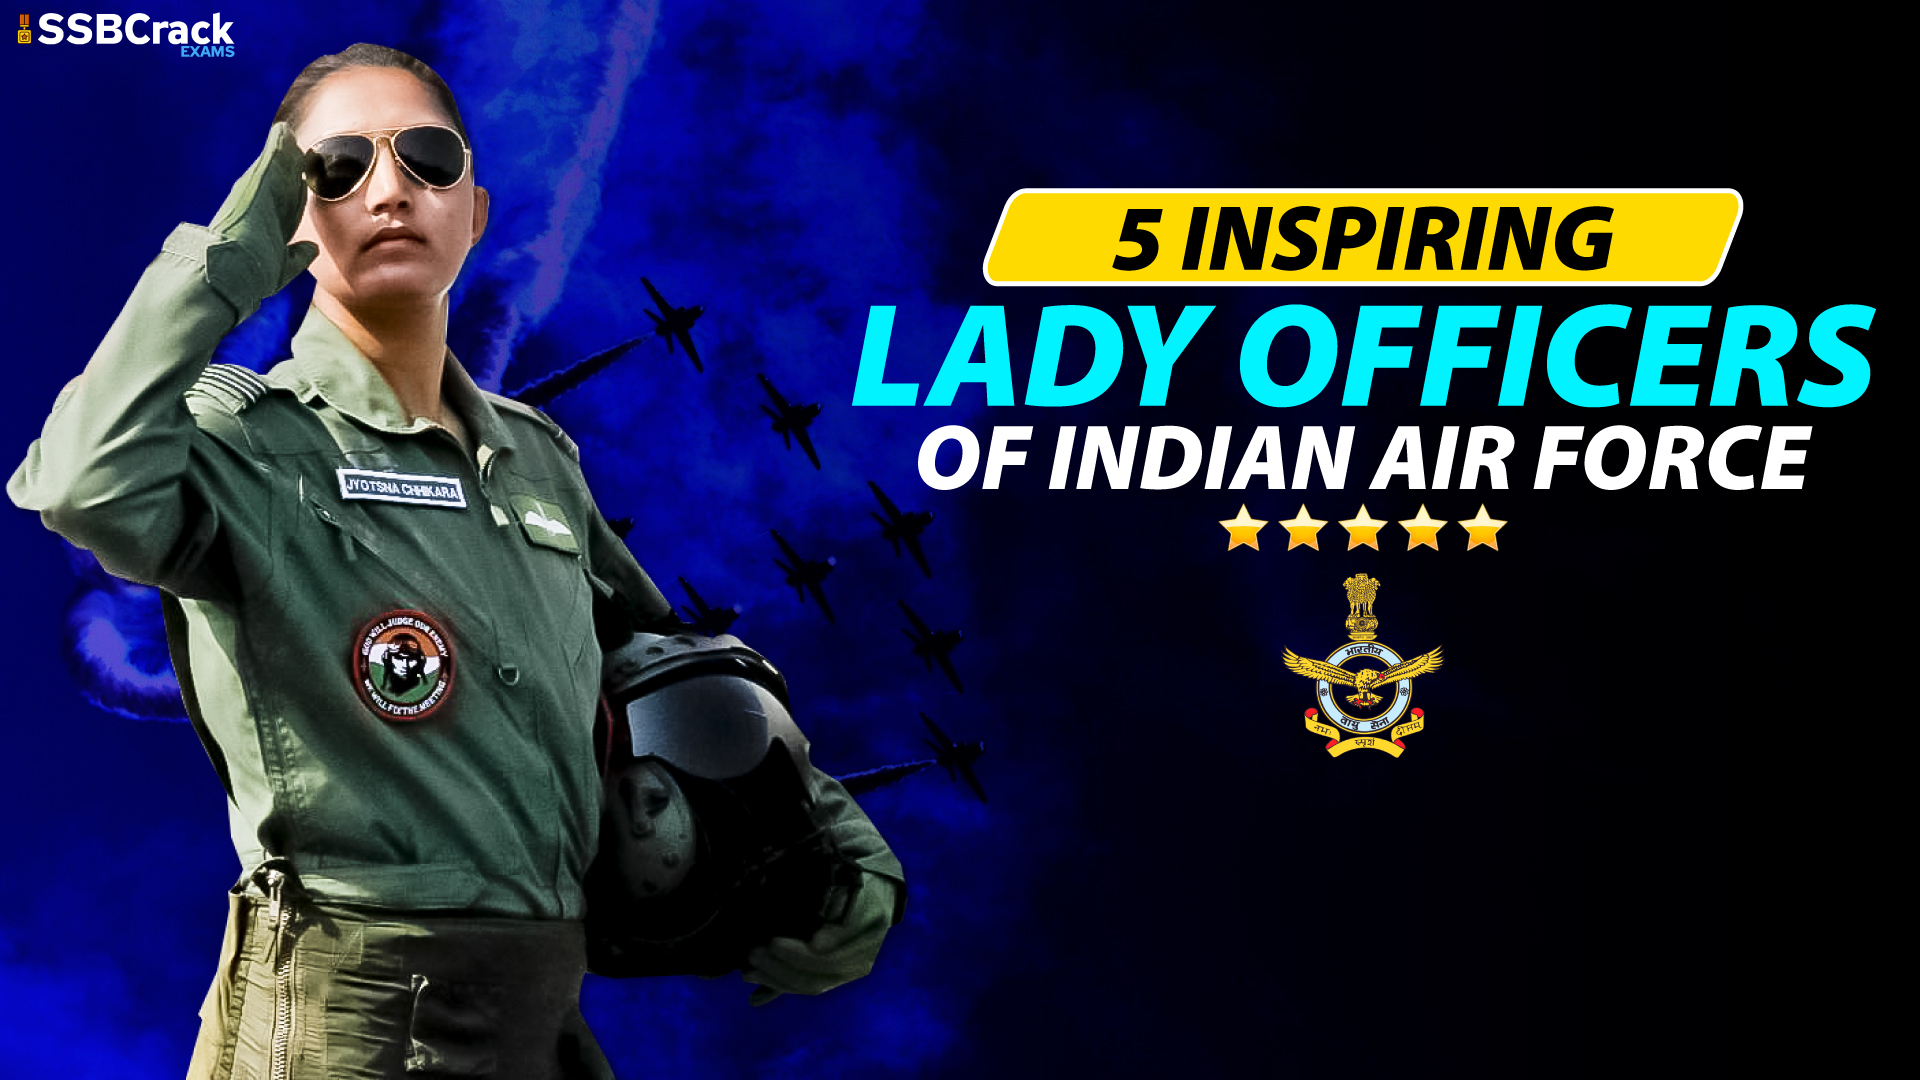 5 Most Inspiring Lady officers of Indian Air Force